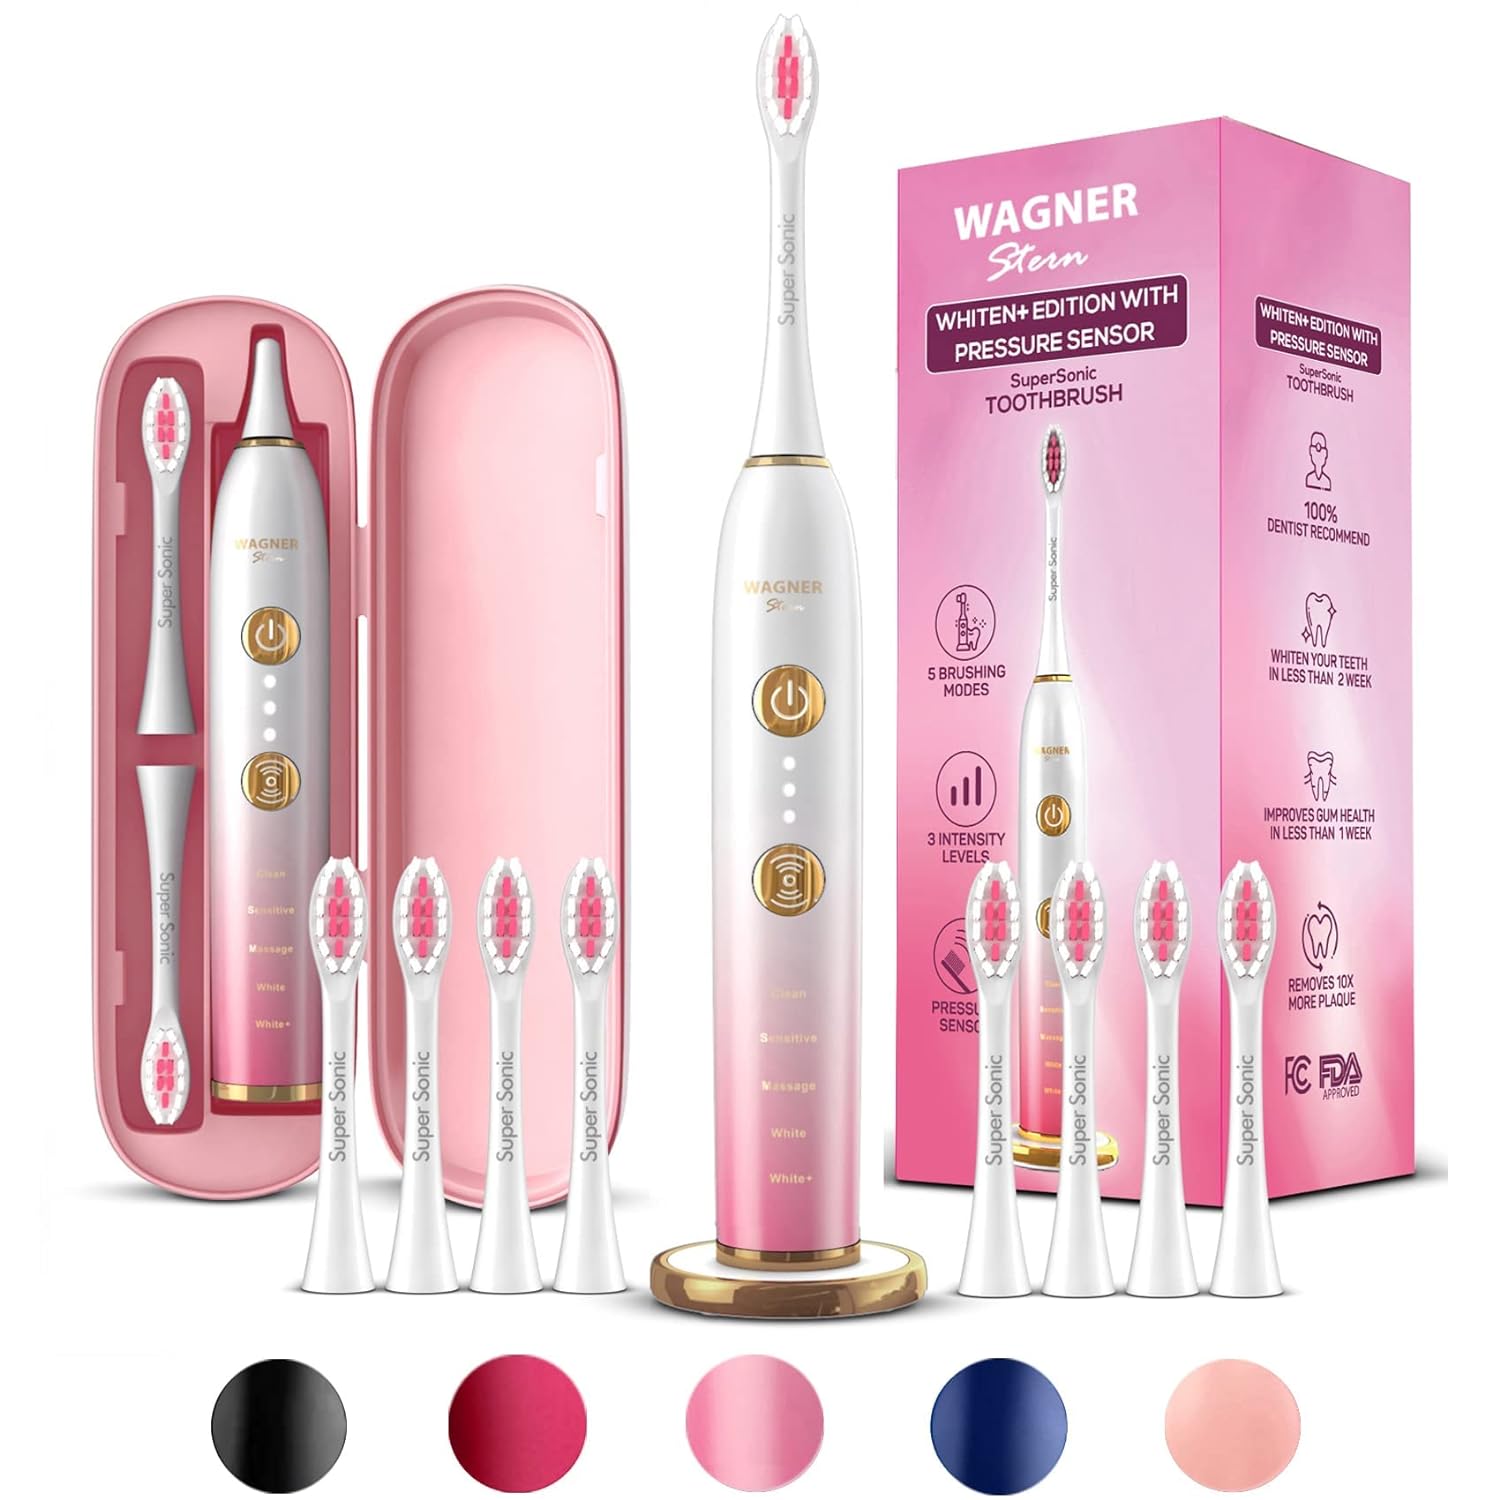 WAGNER Switzerland WHITEN+ Edition. Smart Electric Toothbrush with Pressure Sensor. 5 Brushing Modes and 3 Intensity Levels, 8 Dupont Bristles, Premium Travel Case. (Magnolia Gold)